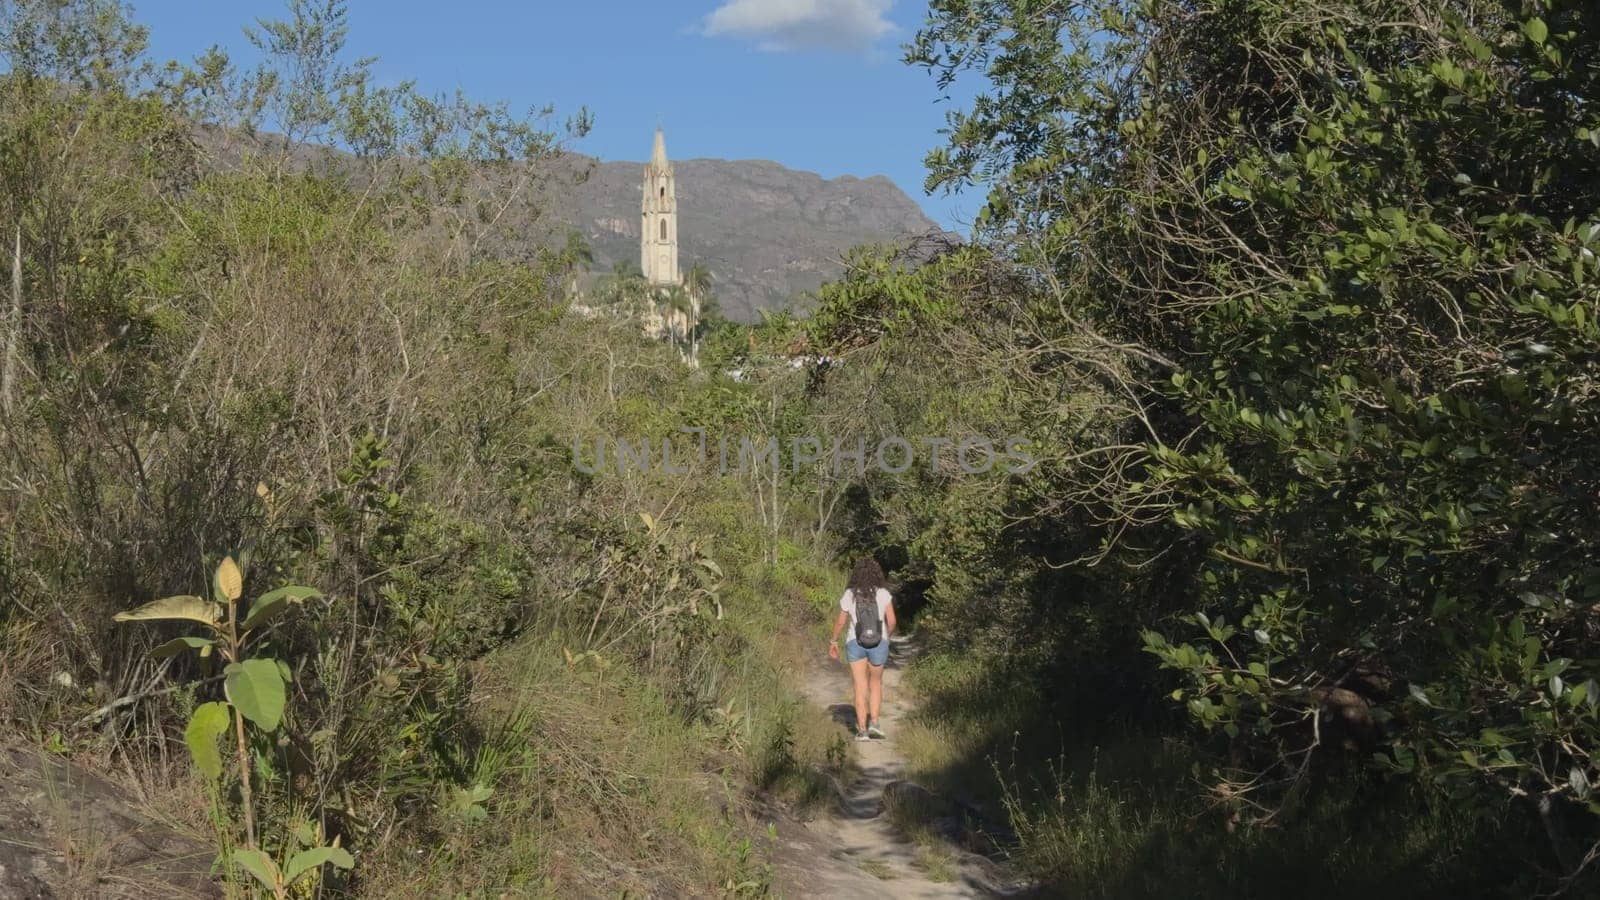 Hiker on Forest Trail with Historic Tower in the Distance by FerradalFCG